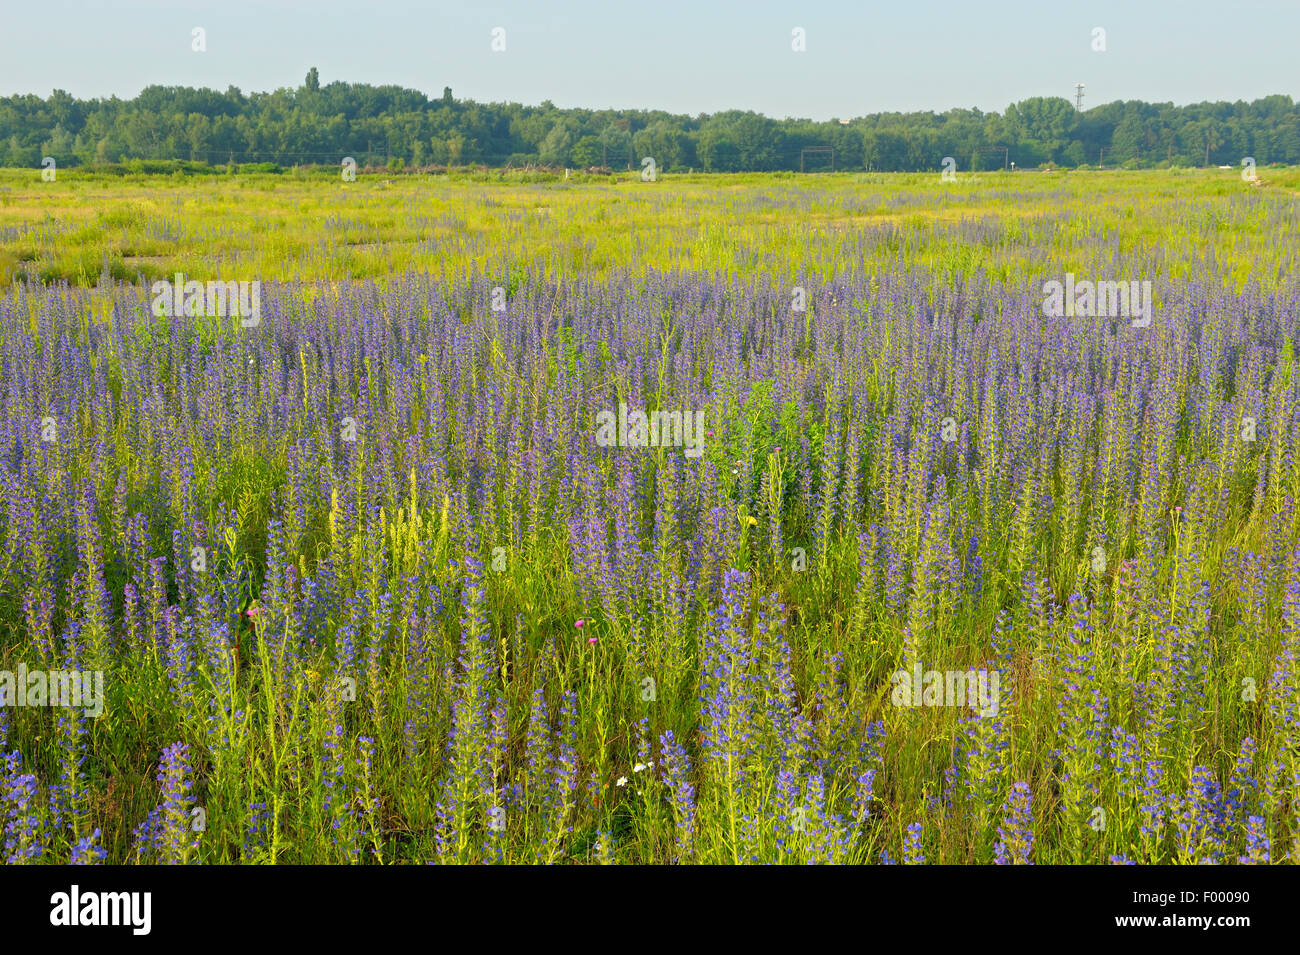 blueweed, blue devil, viper's bugloss, common viper's-bugloss (Echium vulgare), blooming on a industral ground, Germany, North Rhine-Westphalia Stock Photo